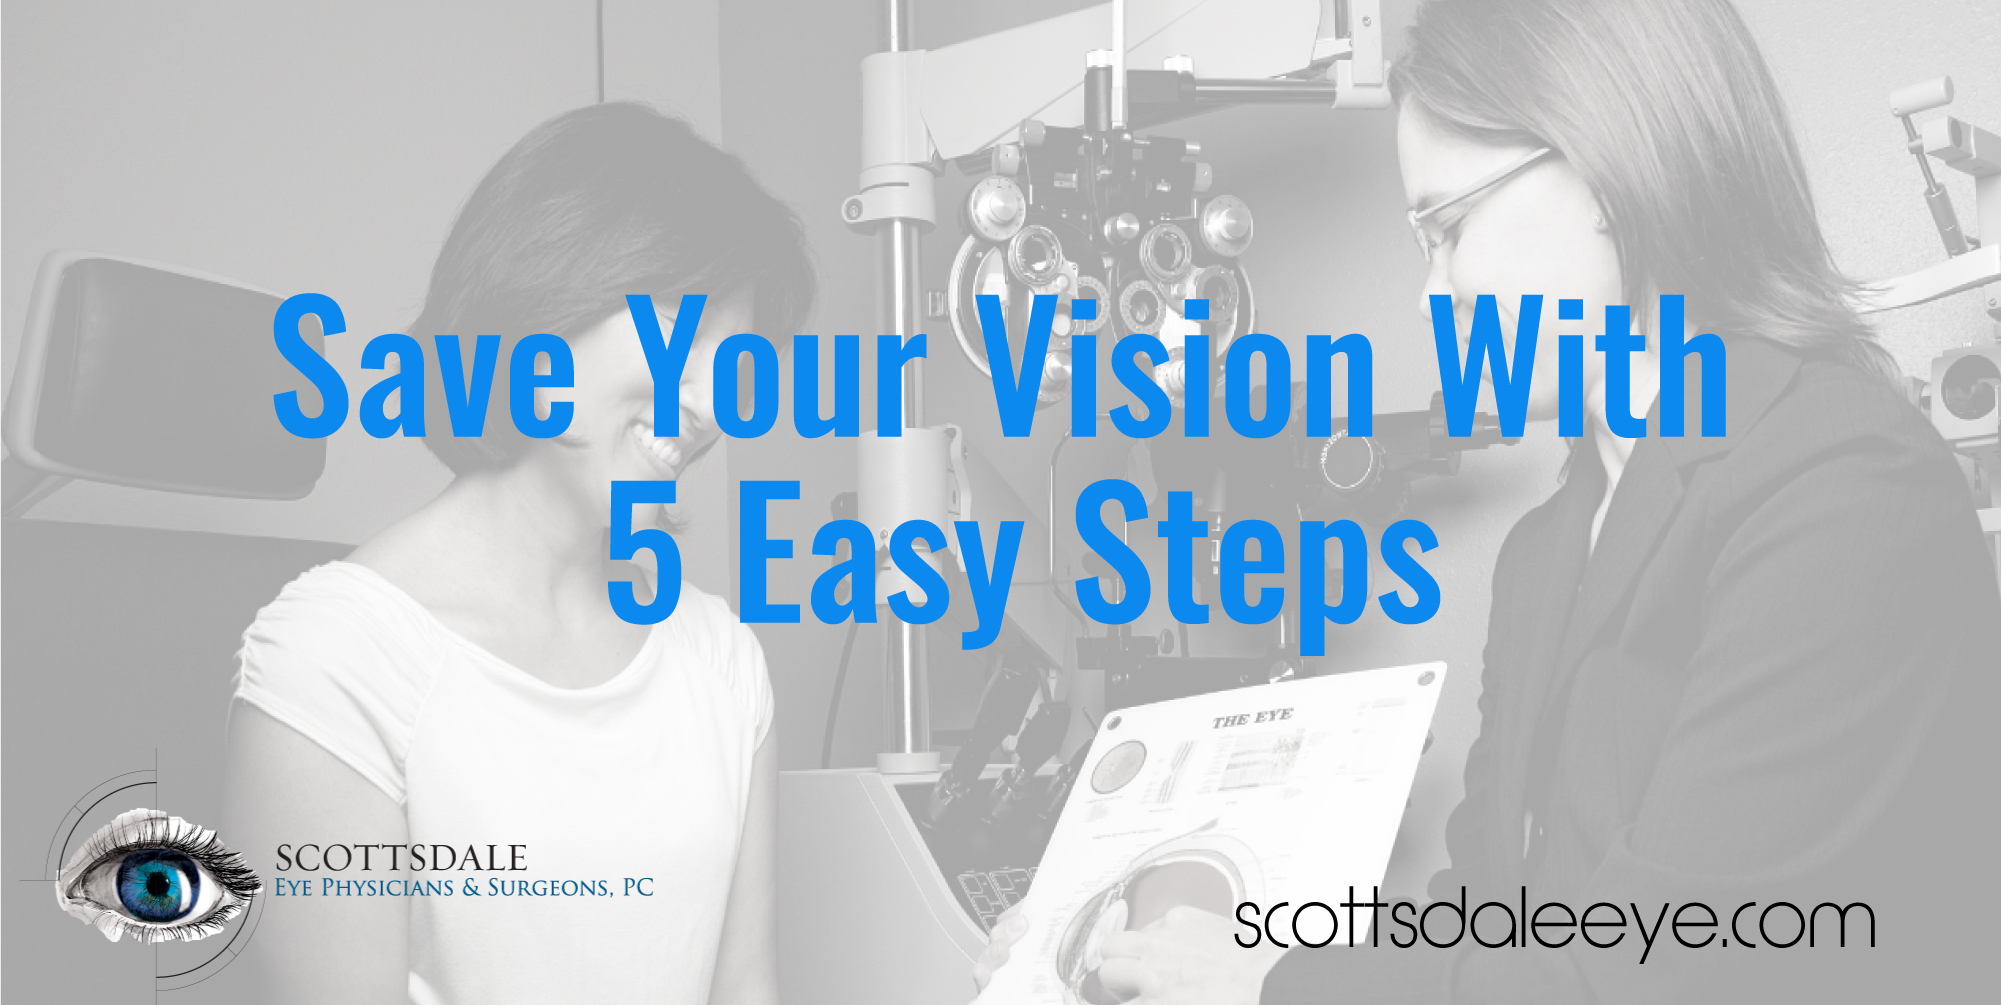 Save Your Vision With These 5 Easy Steps